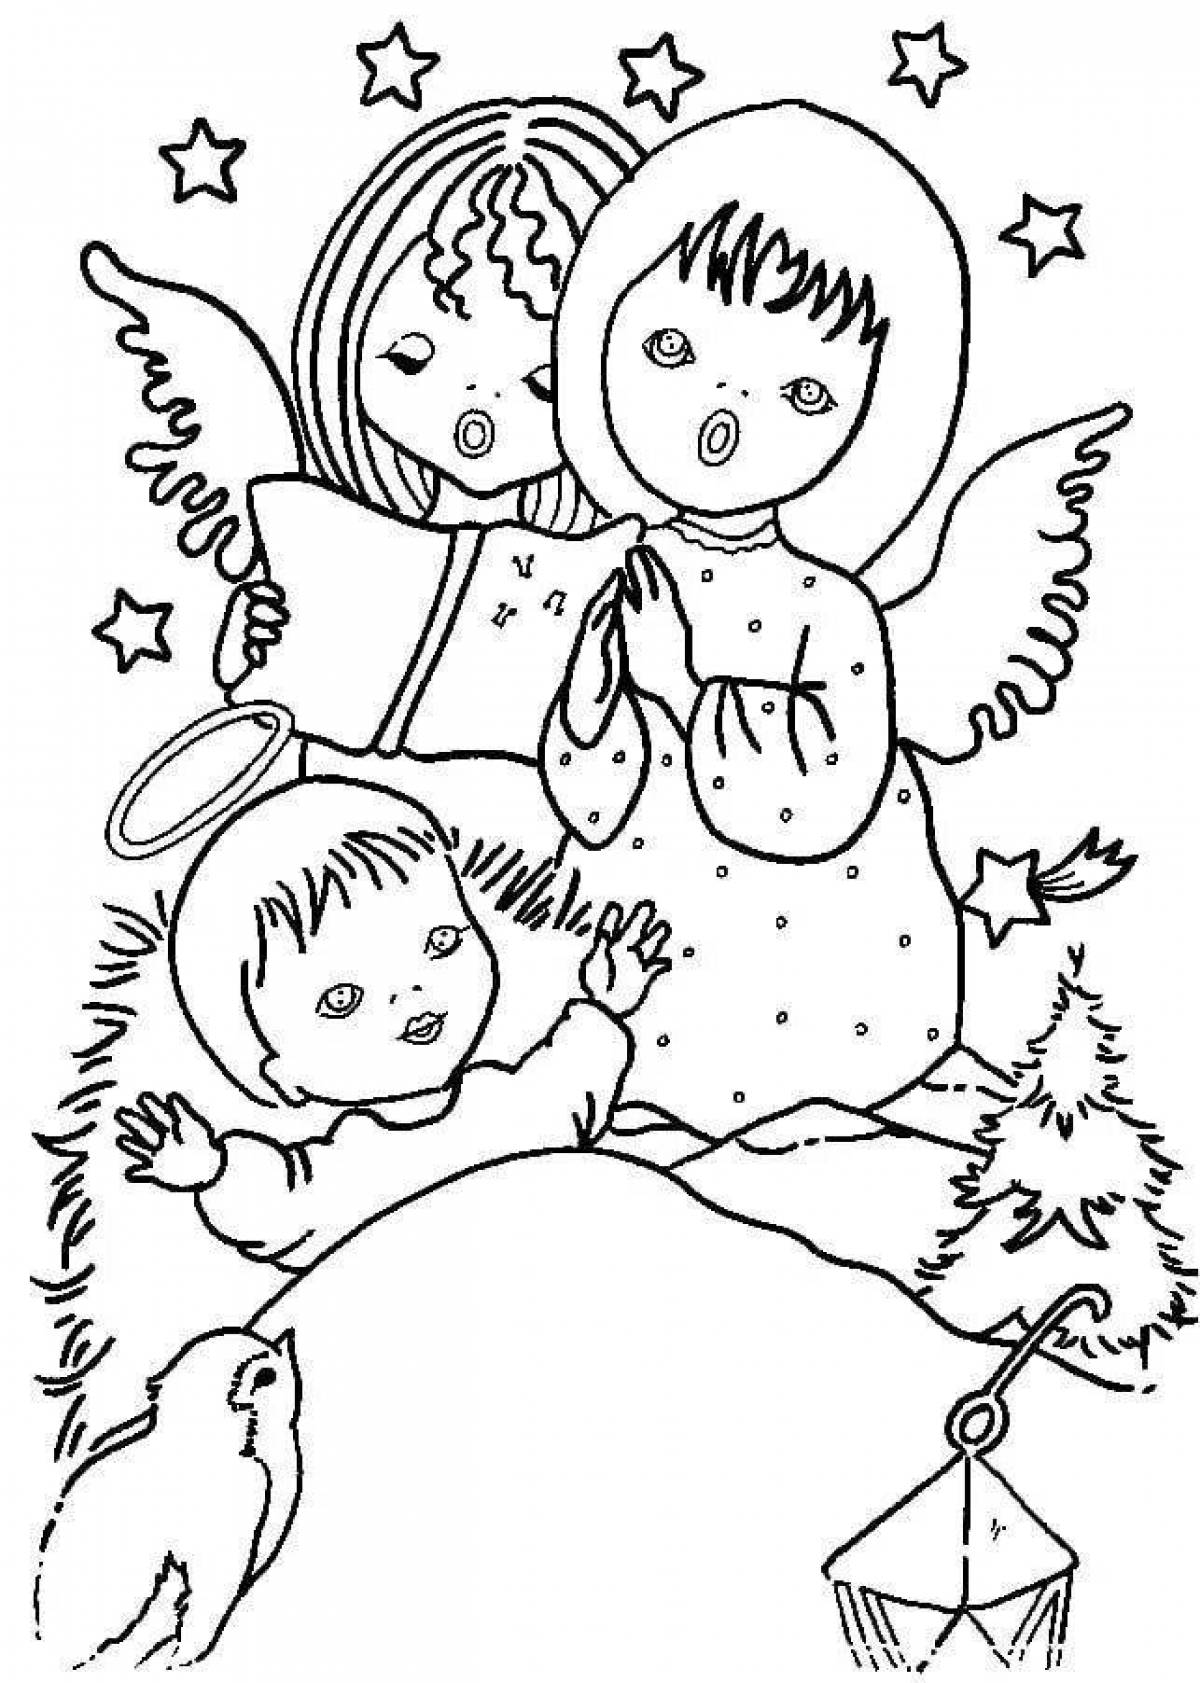 A fun coloring book with a Christmas card